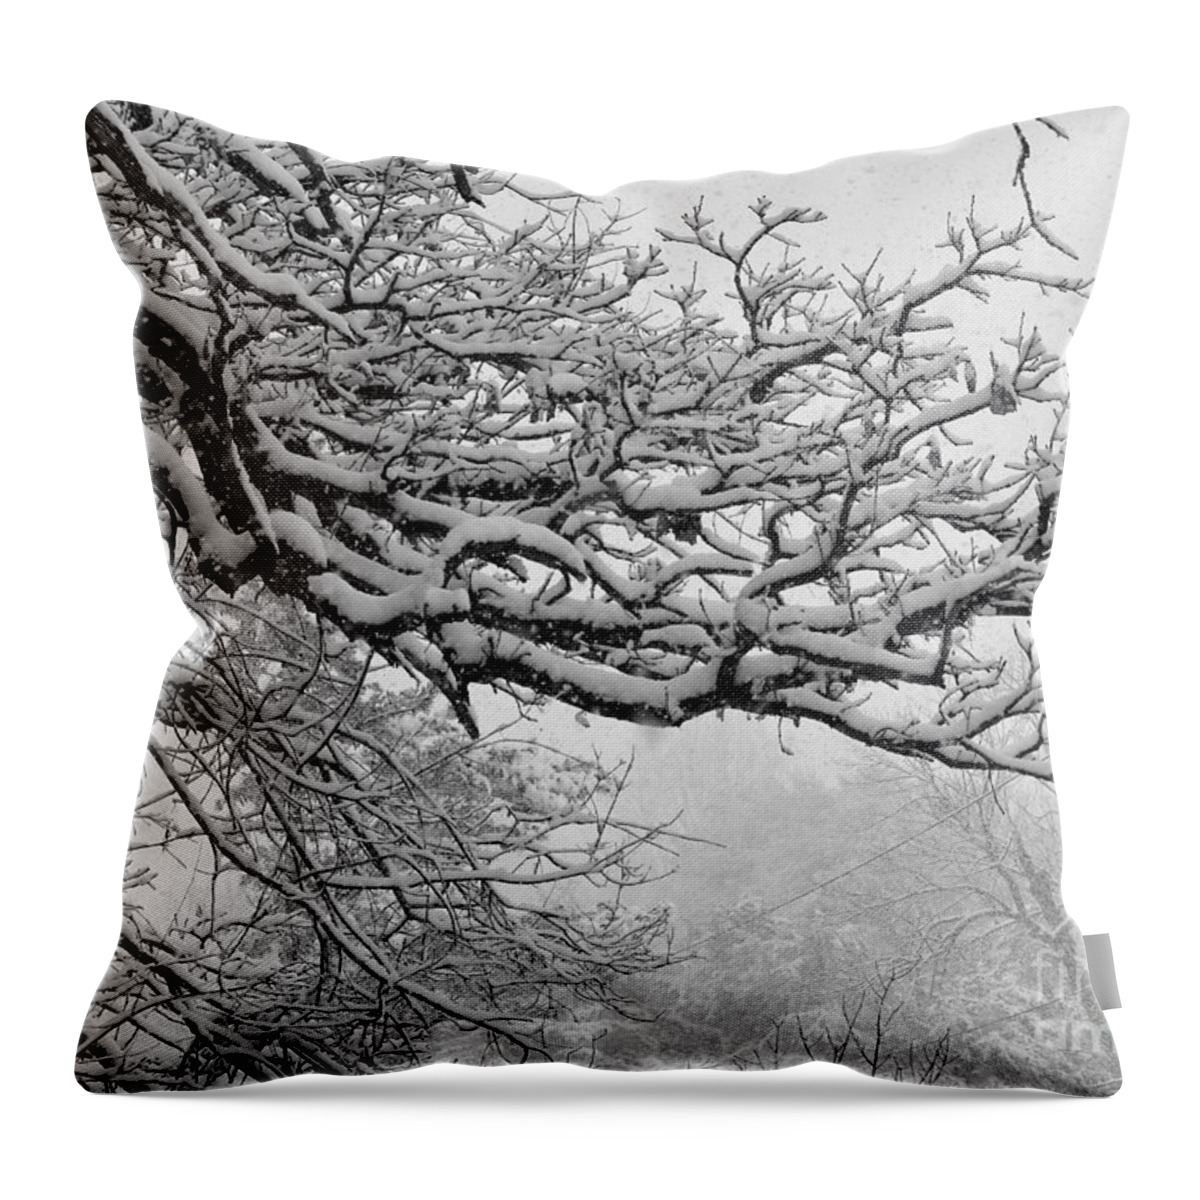 Snow-laden Limbs Throw Pillow featuring the photograph Spring Snow On Branches by Rosanne Licciardi